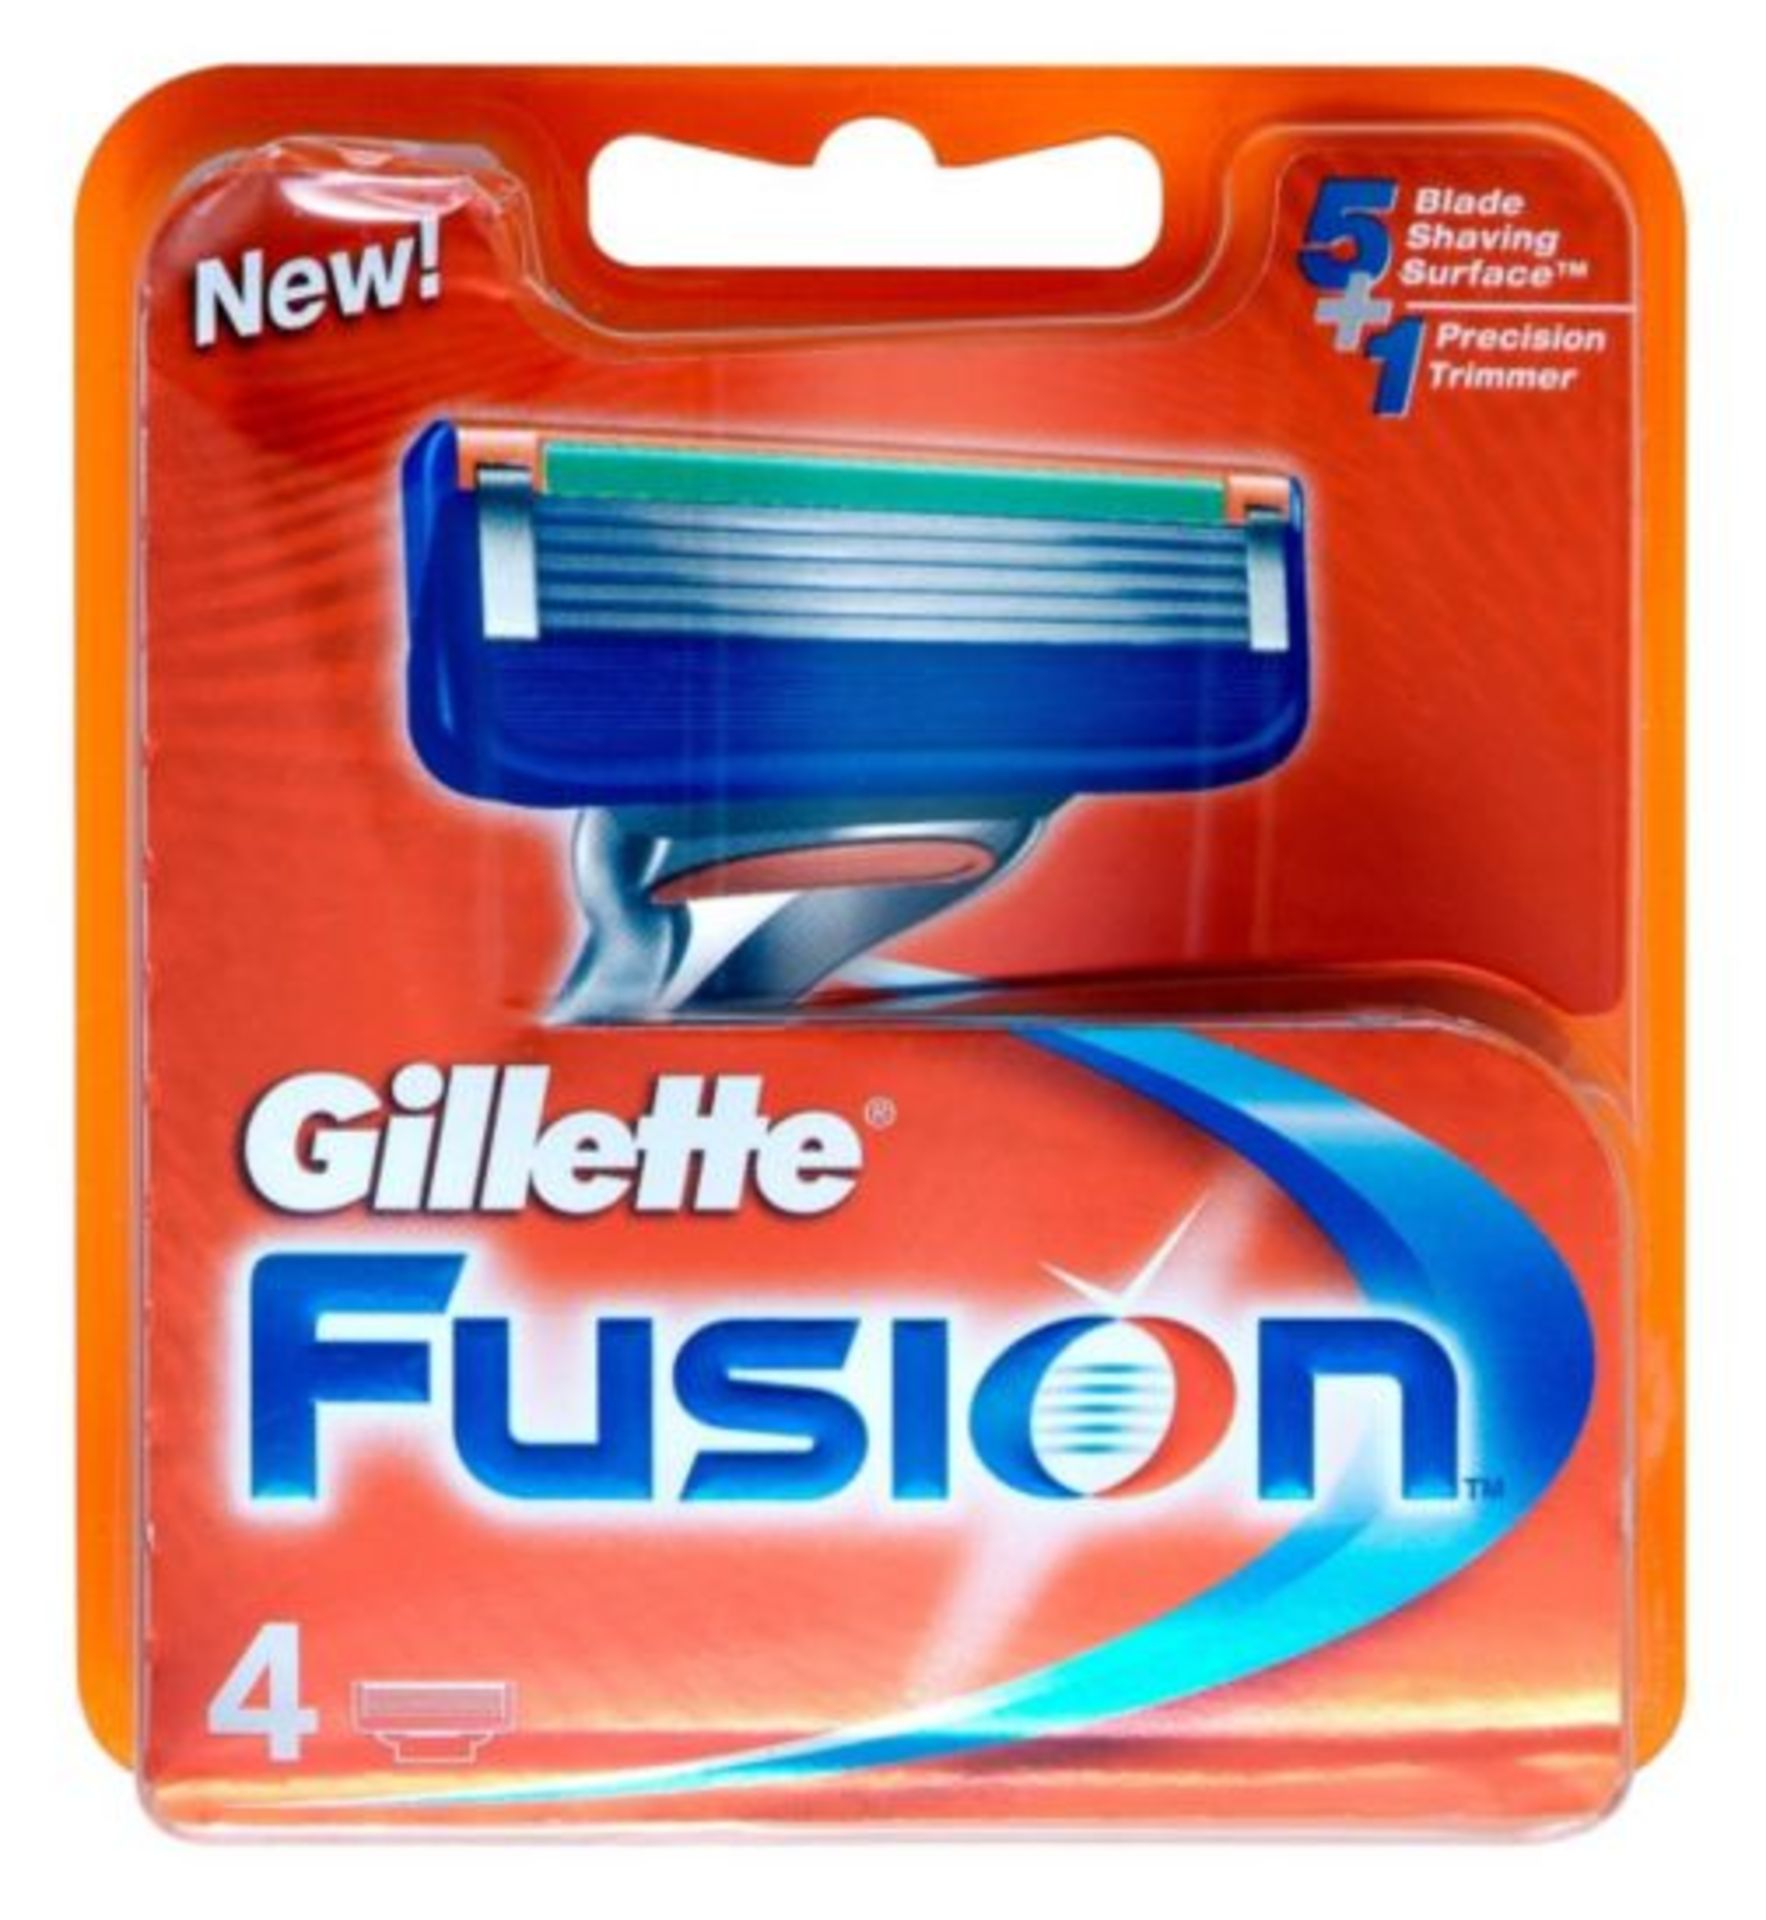 V Brand New Gillette Fusion Razor Blades 4 Pack RRP: £13.98 X200  Bid price to be multiplied by